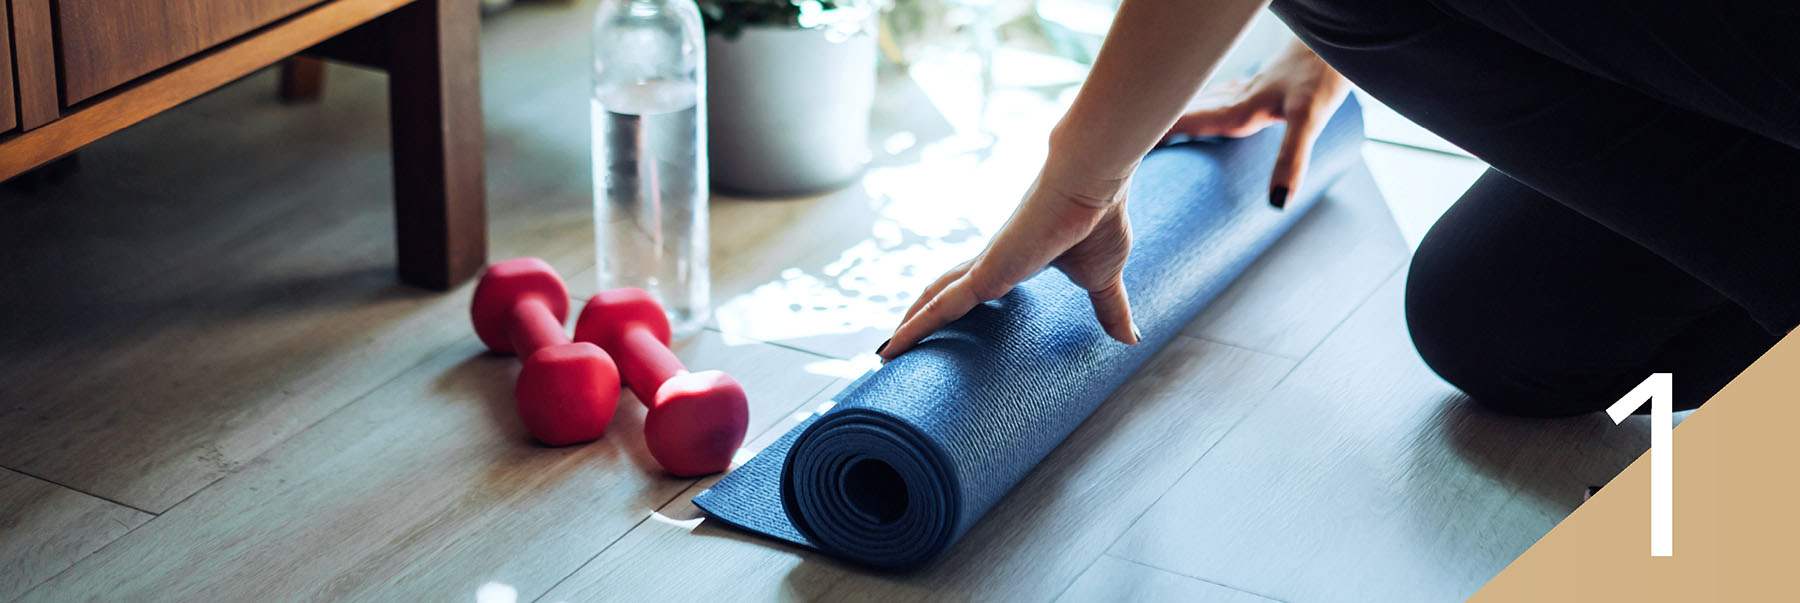 Woman rolling up her yoga mat; Competing needs of retirement and legacy planning